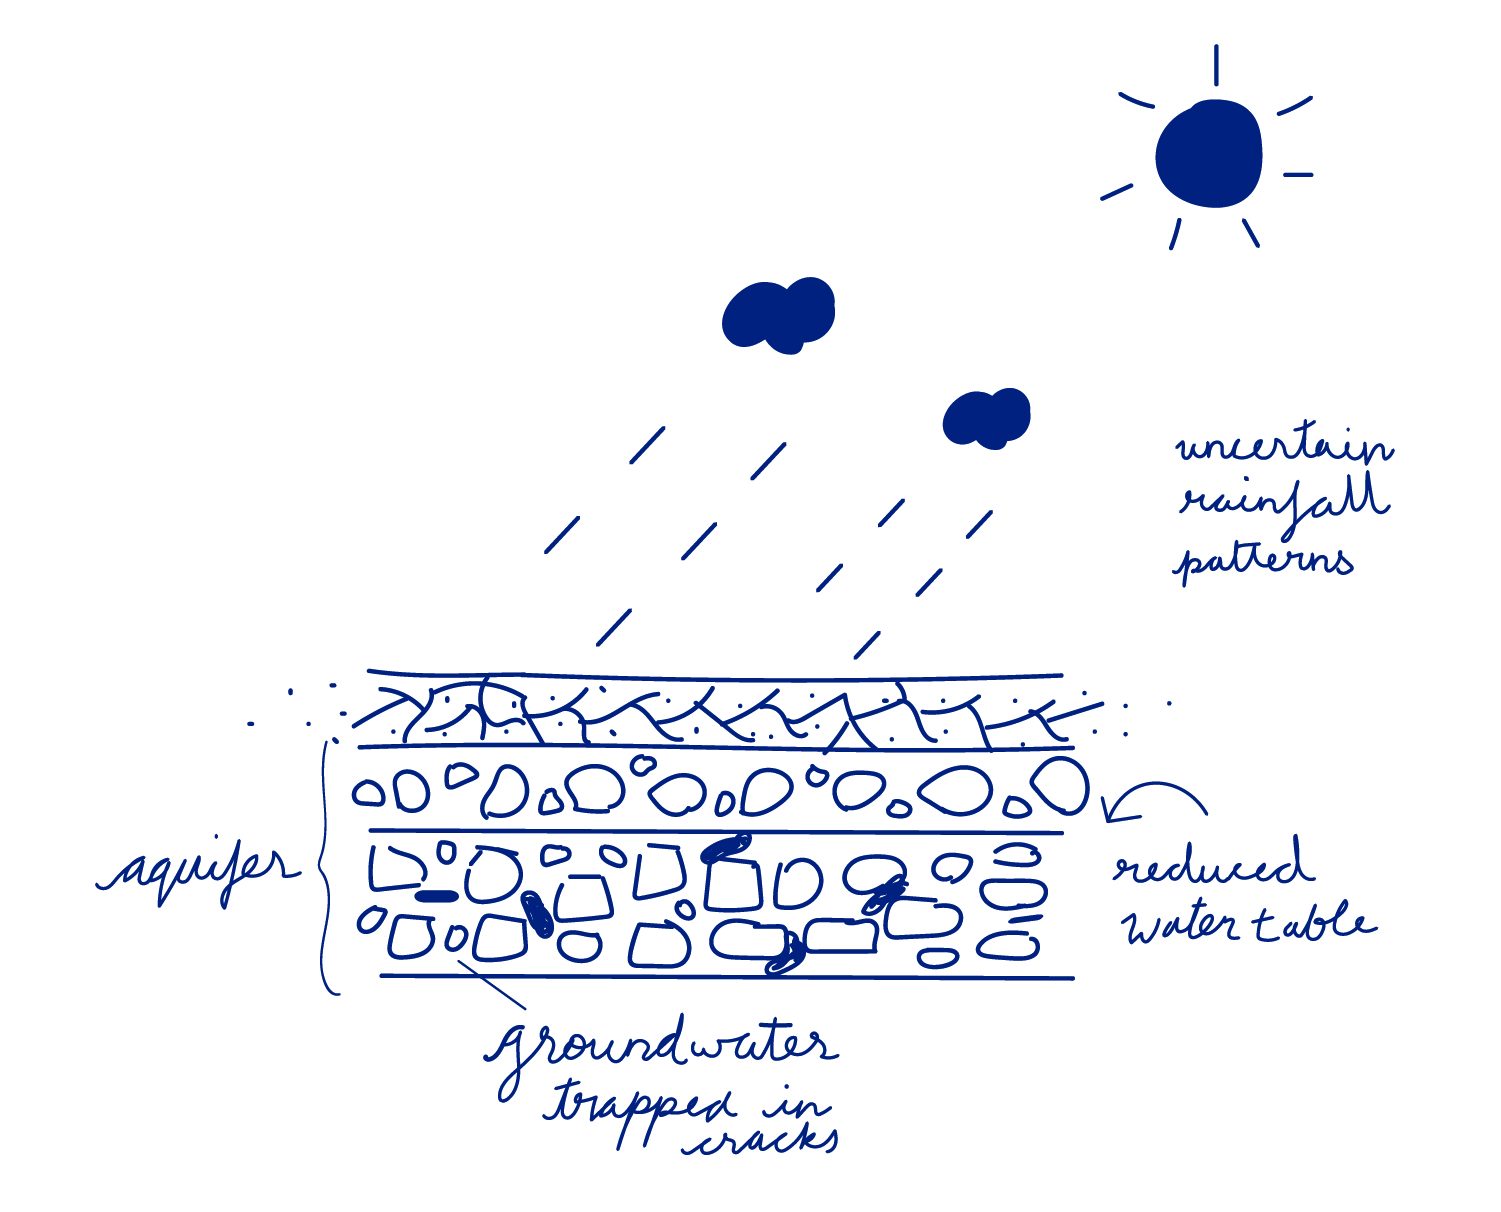 hand drawn sketch of how climate change affects groundwater: the sun and 2 clouds are in the sky with a few rain drops. "uncertain rainfall patterns" is written on the side. The rain falls on dry ground. Underneath, there are 2 layers of rocks labelled as "aquifer". The first layer is dry and an arrow indicates "reduced water table". The second layer underneath shows groundwater trapped in cracks